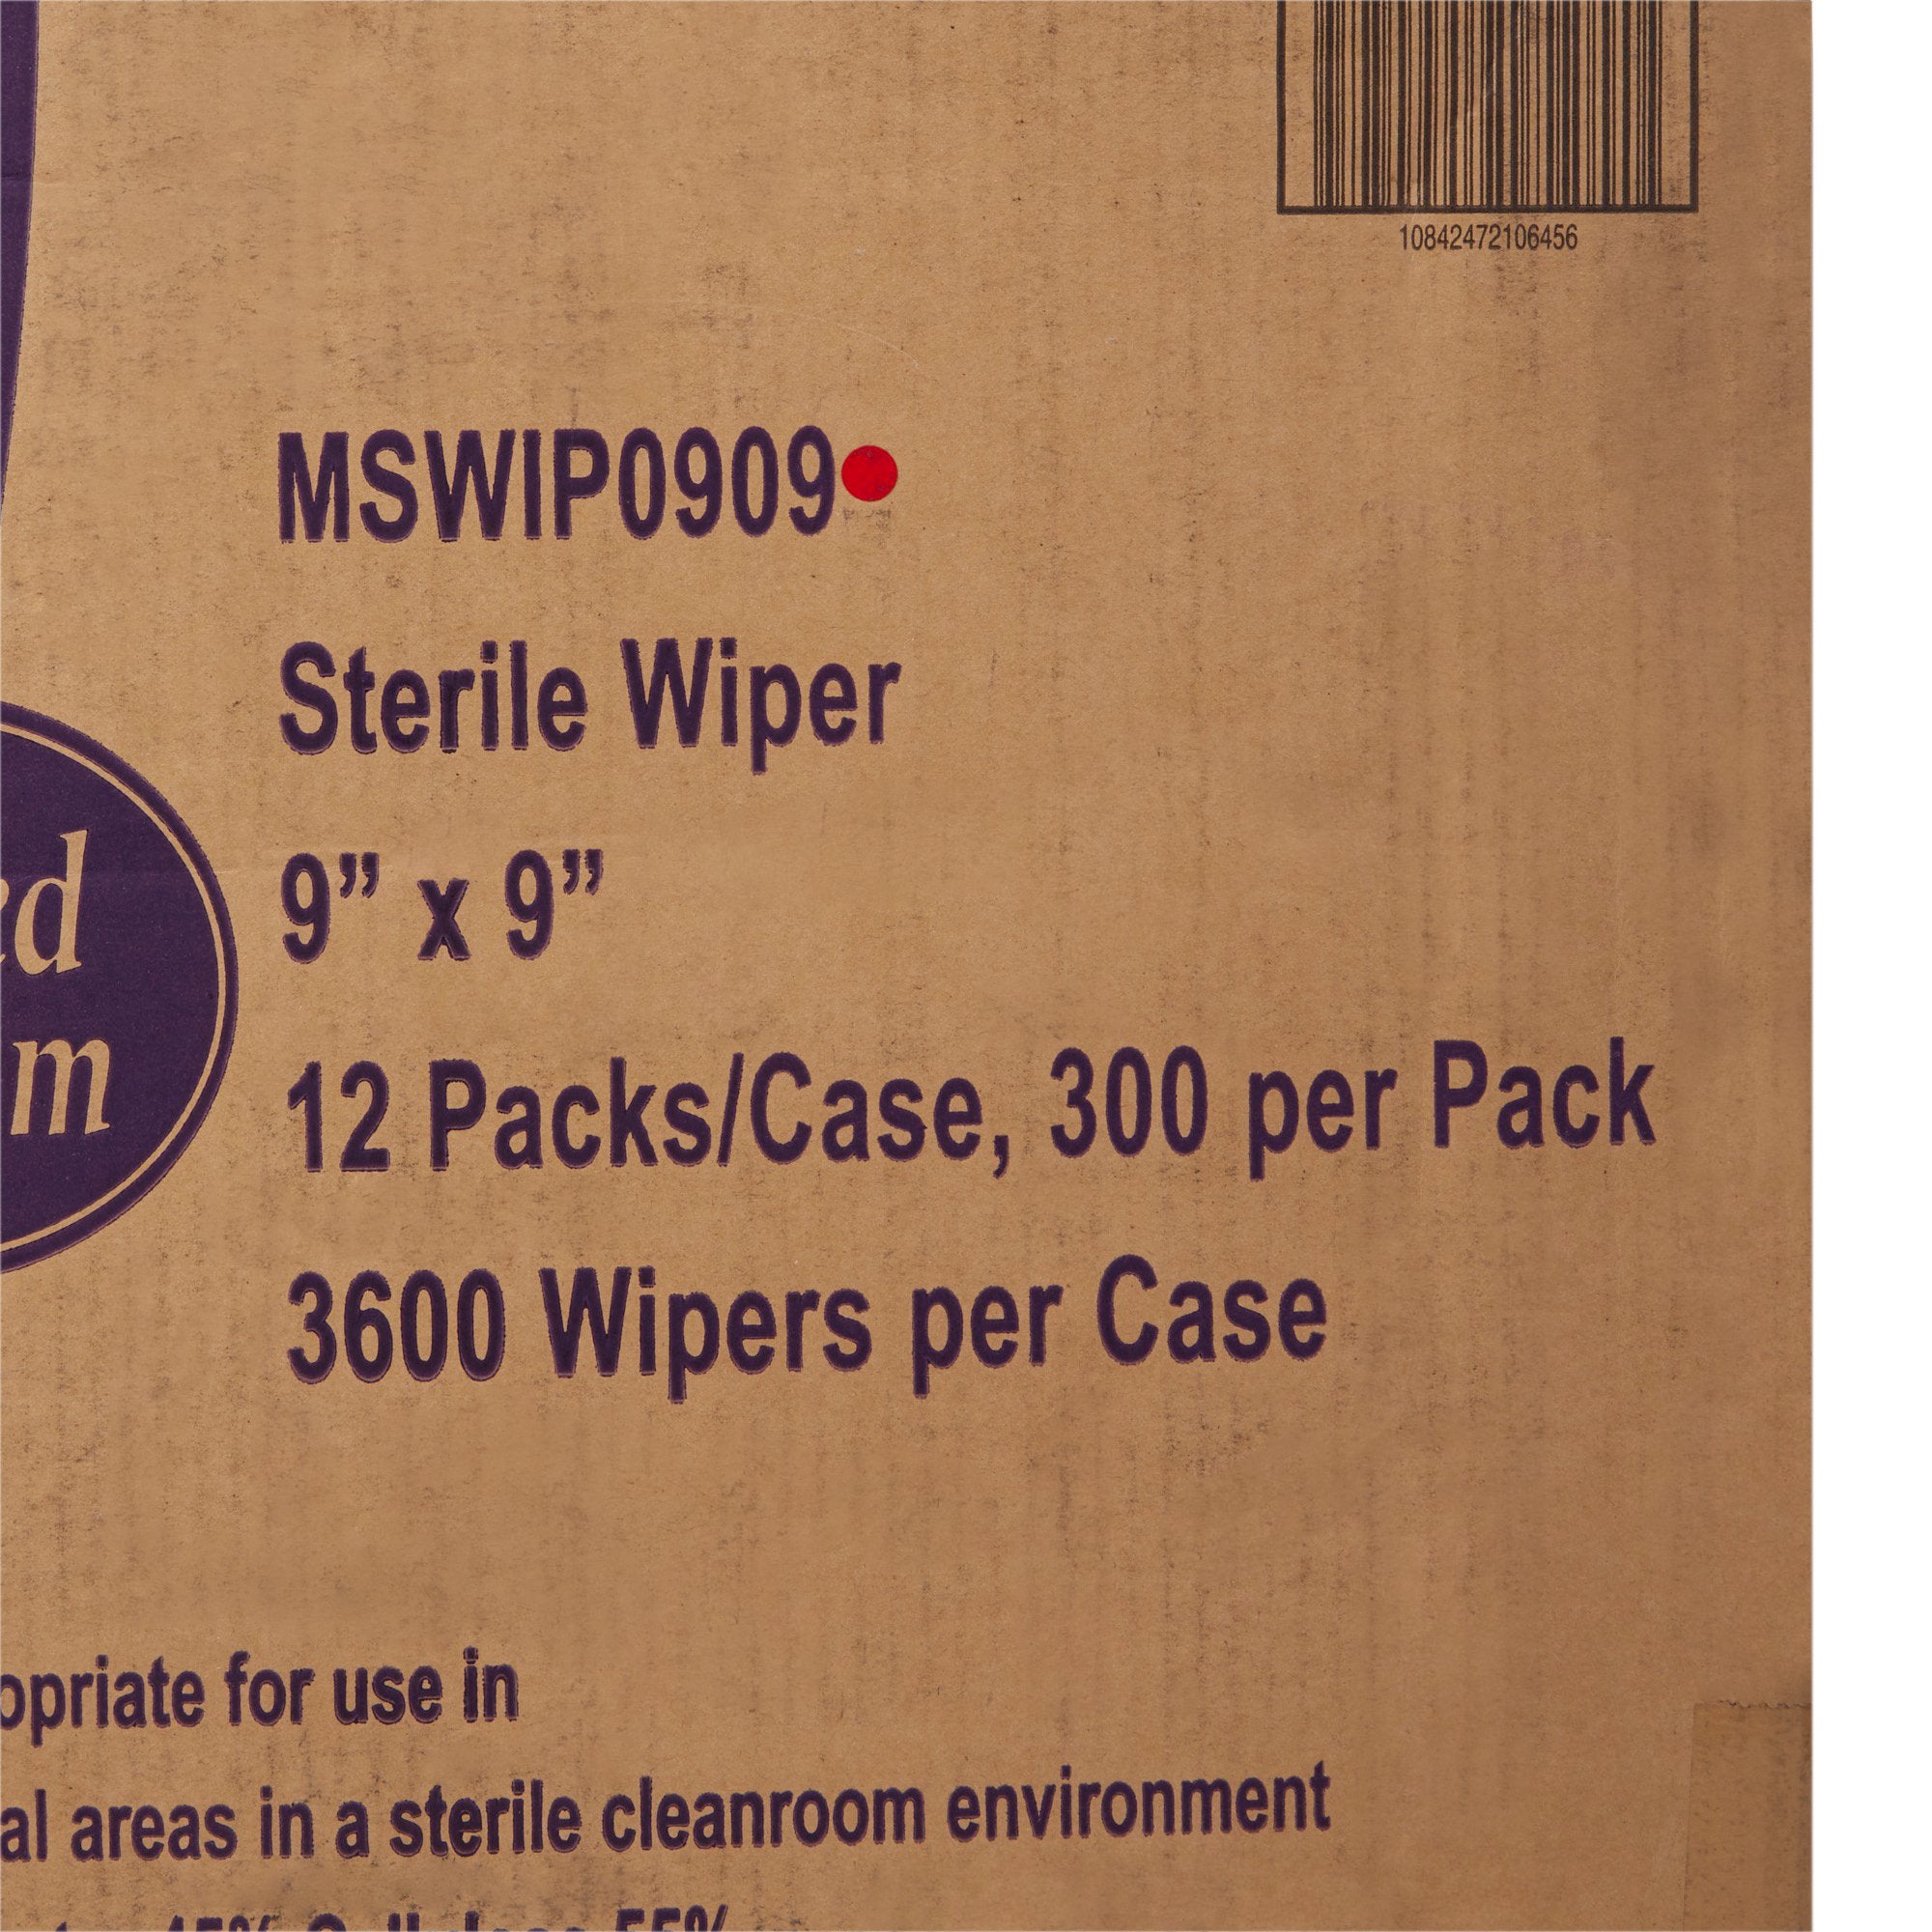 Cleanroom Wipe McKesson ISO Class 5 White Sterile Polyester / Cellulose 9 X 9 Inch Disposable